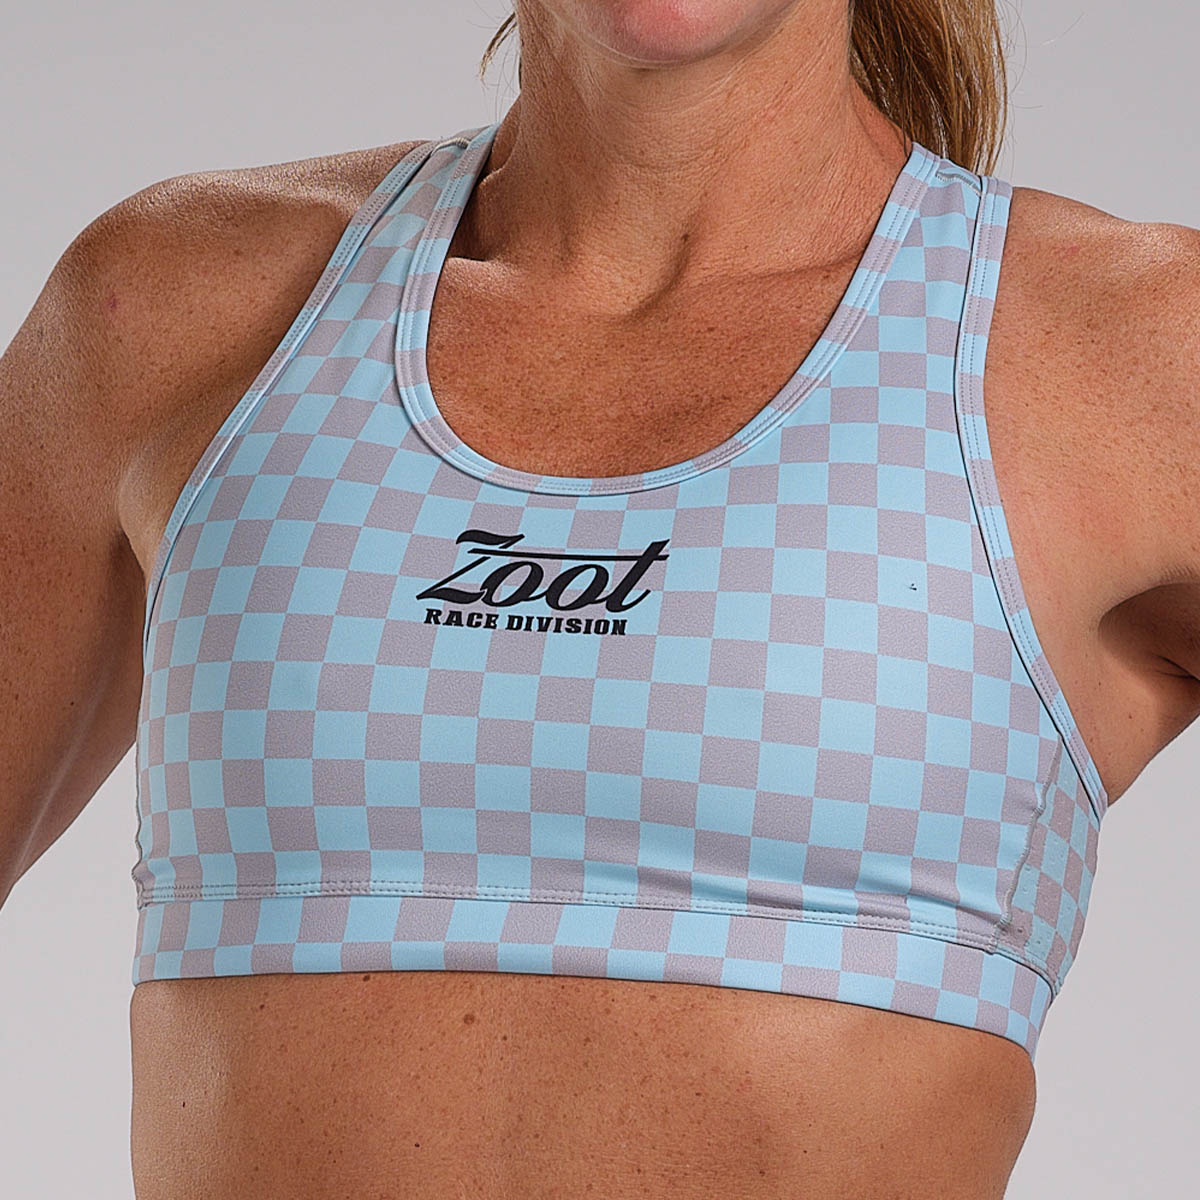 The Perfect Sports Bra for Triathlon Training and Racing